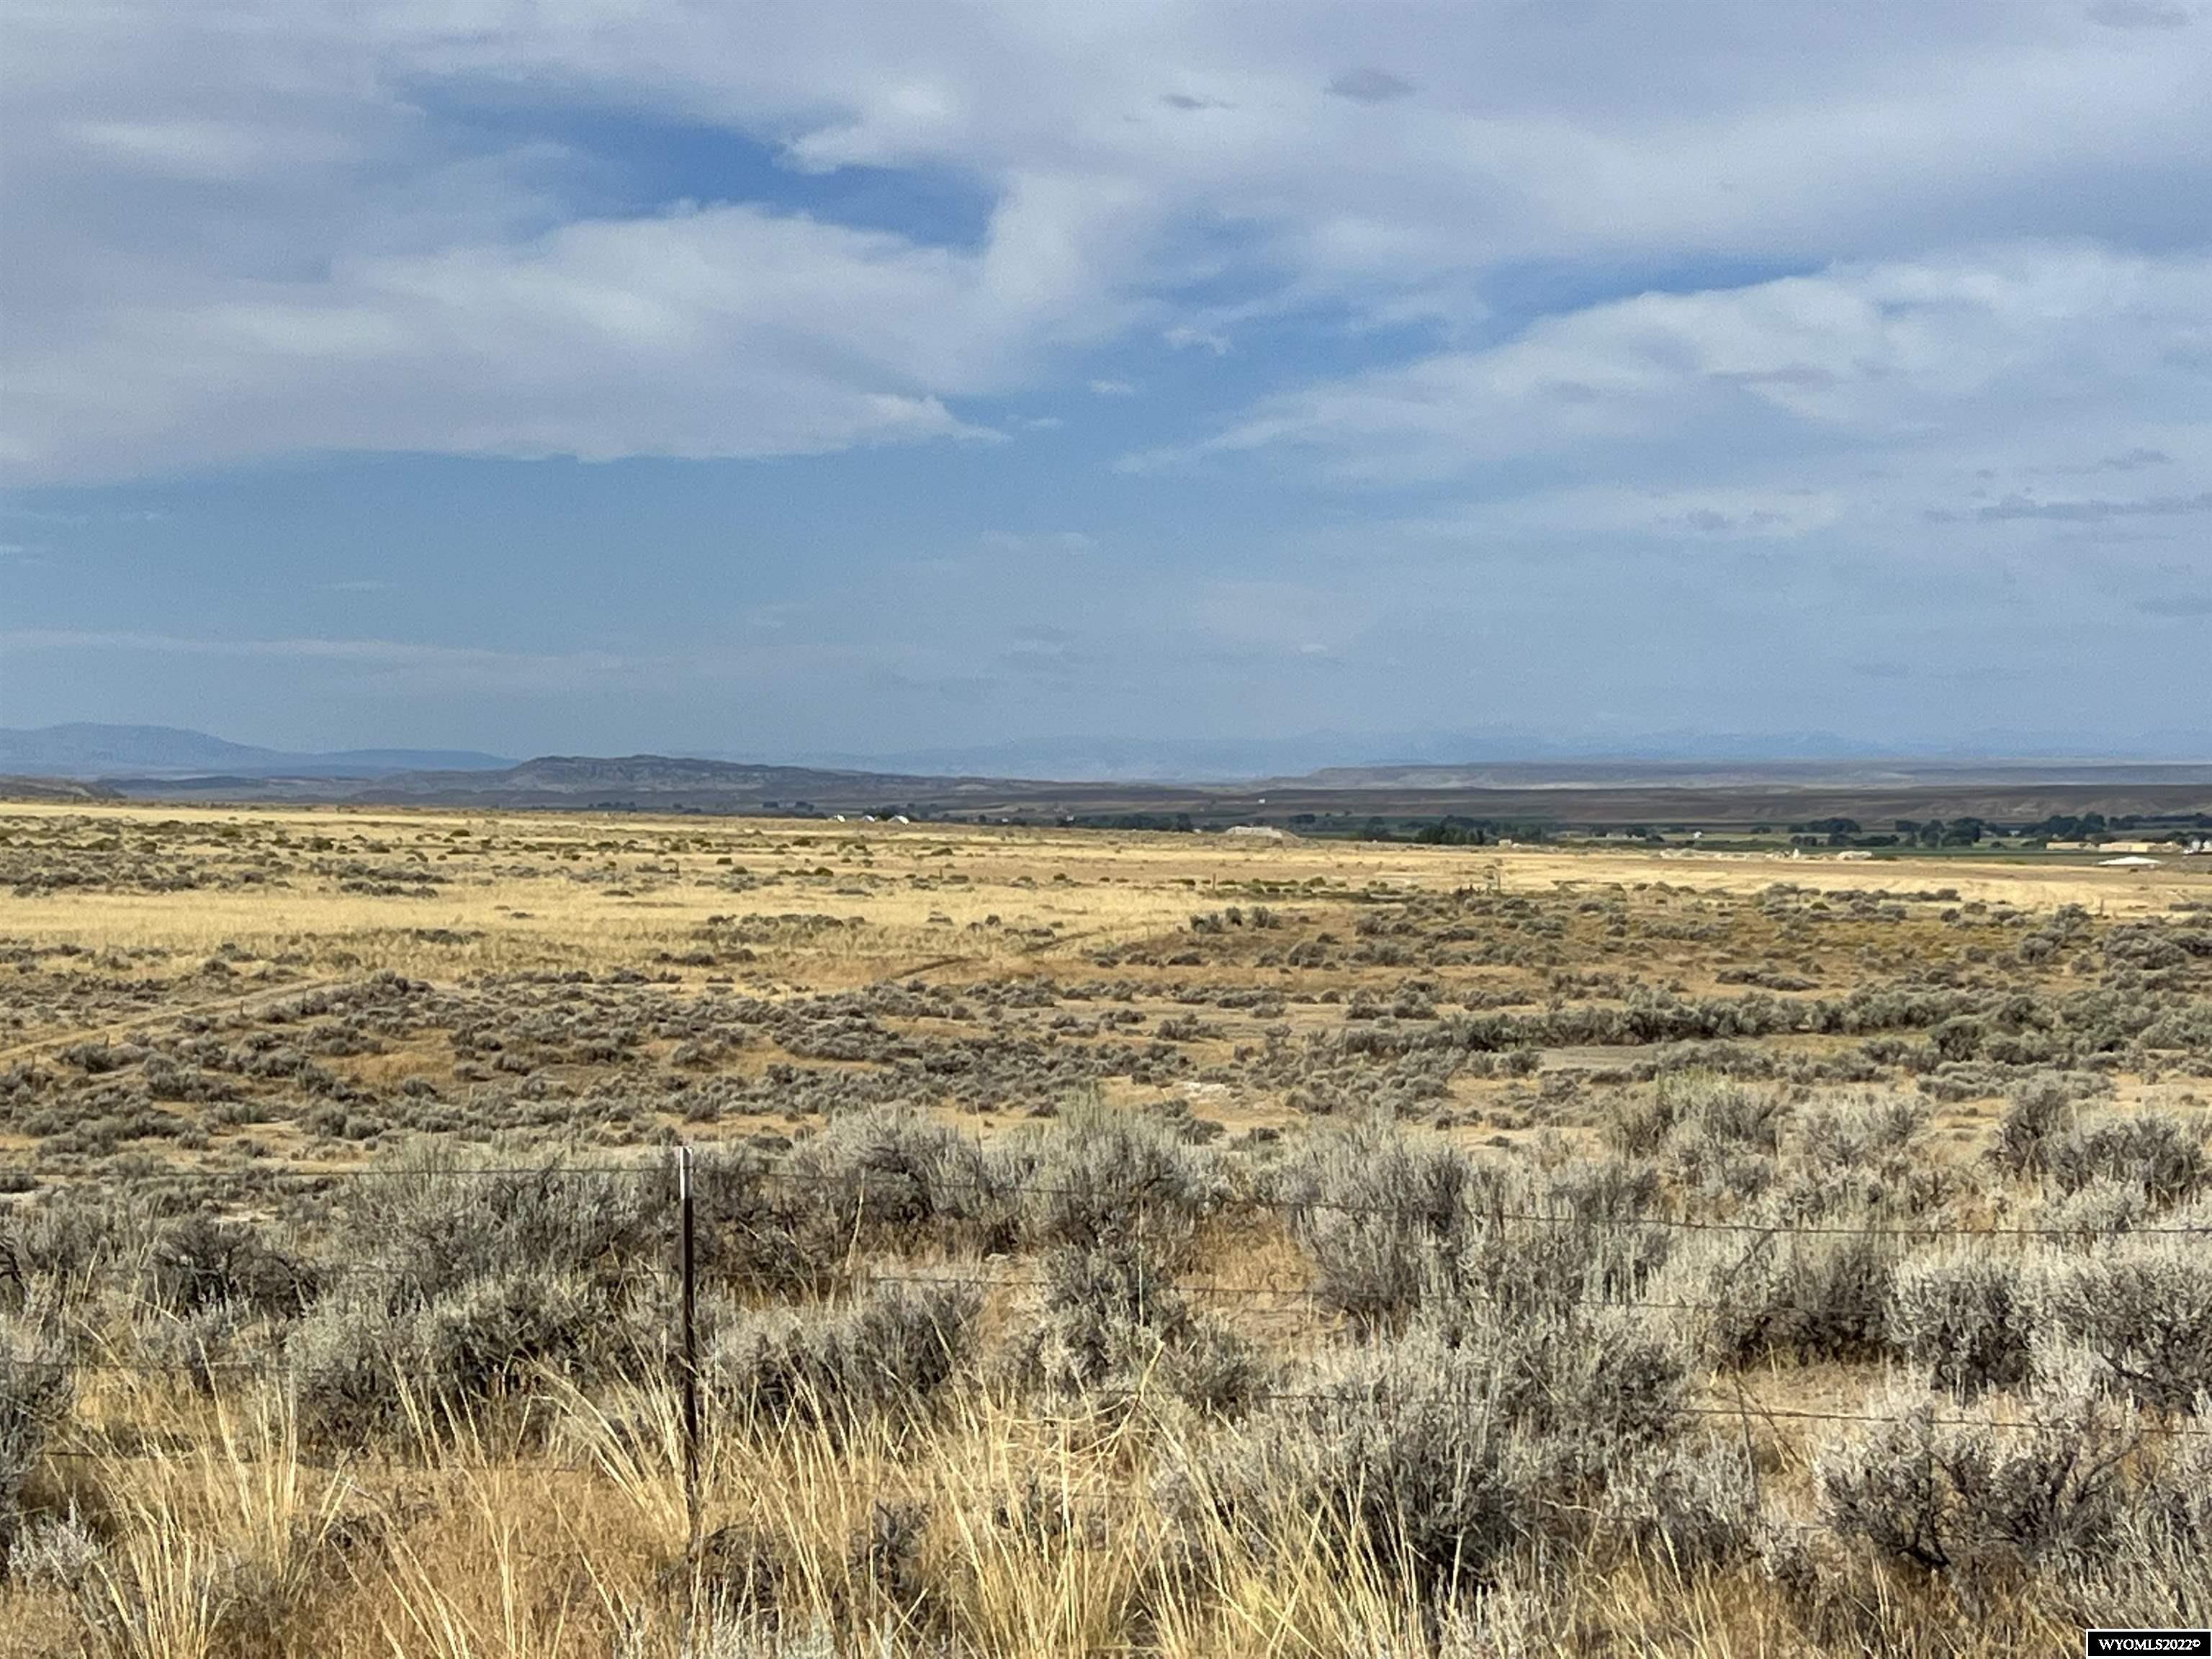 Lots of potential for this 80 acre spread. Originally purchased for private homestead. 400 Ft. Well on property, hasn't been used recently but when last tested with generator and pump, water was accessible. Well maintained fence around the entire perimeter,  Perfect location for grazing horses. Canal borders property.